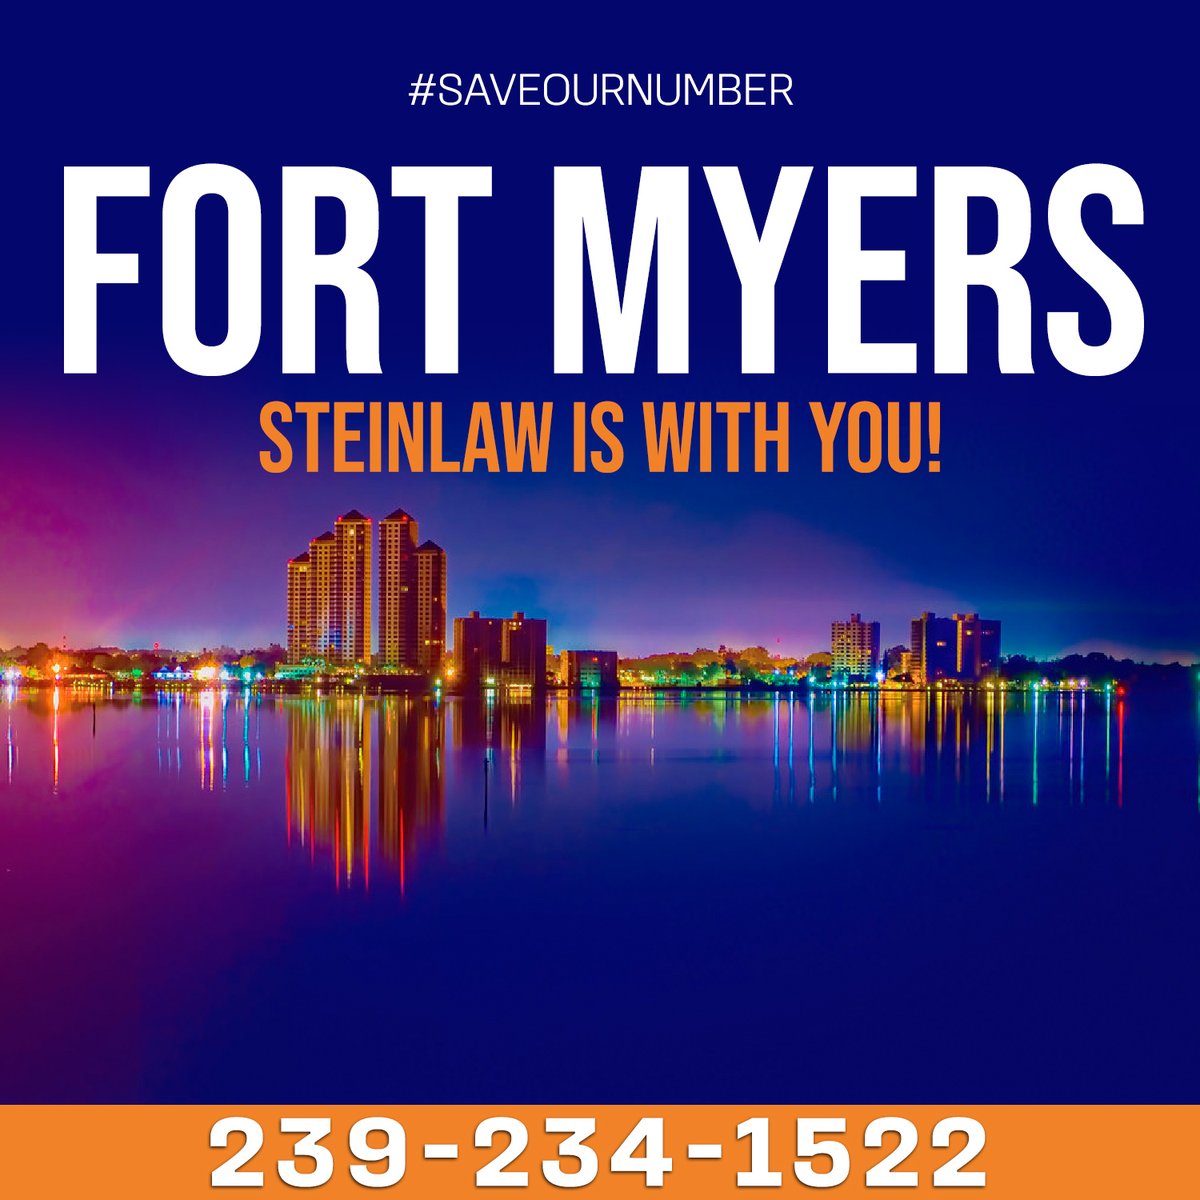 Steinlaw Injury Lawyers is present throughout Florida, including Fort Myers! Save our number: 561-819-8060

#accidentattorneys #accidentlawyer #injuryattorney #injurylawyer #floridalawyer #fortmyers

Steinlaw.com